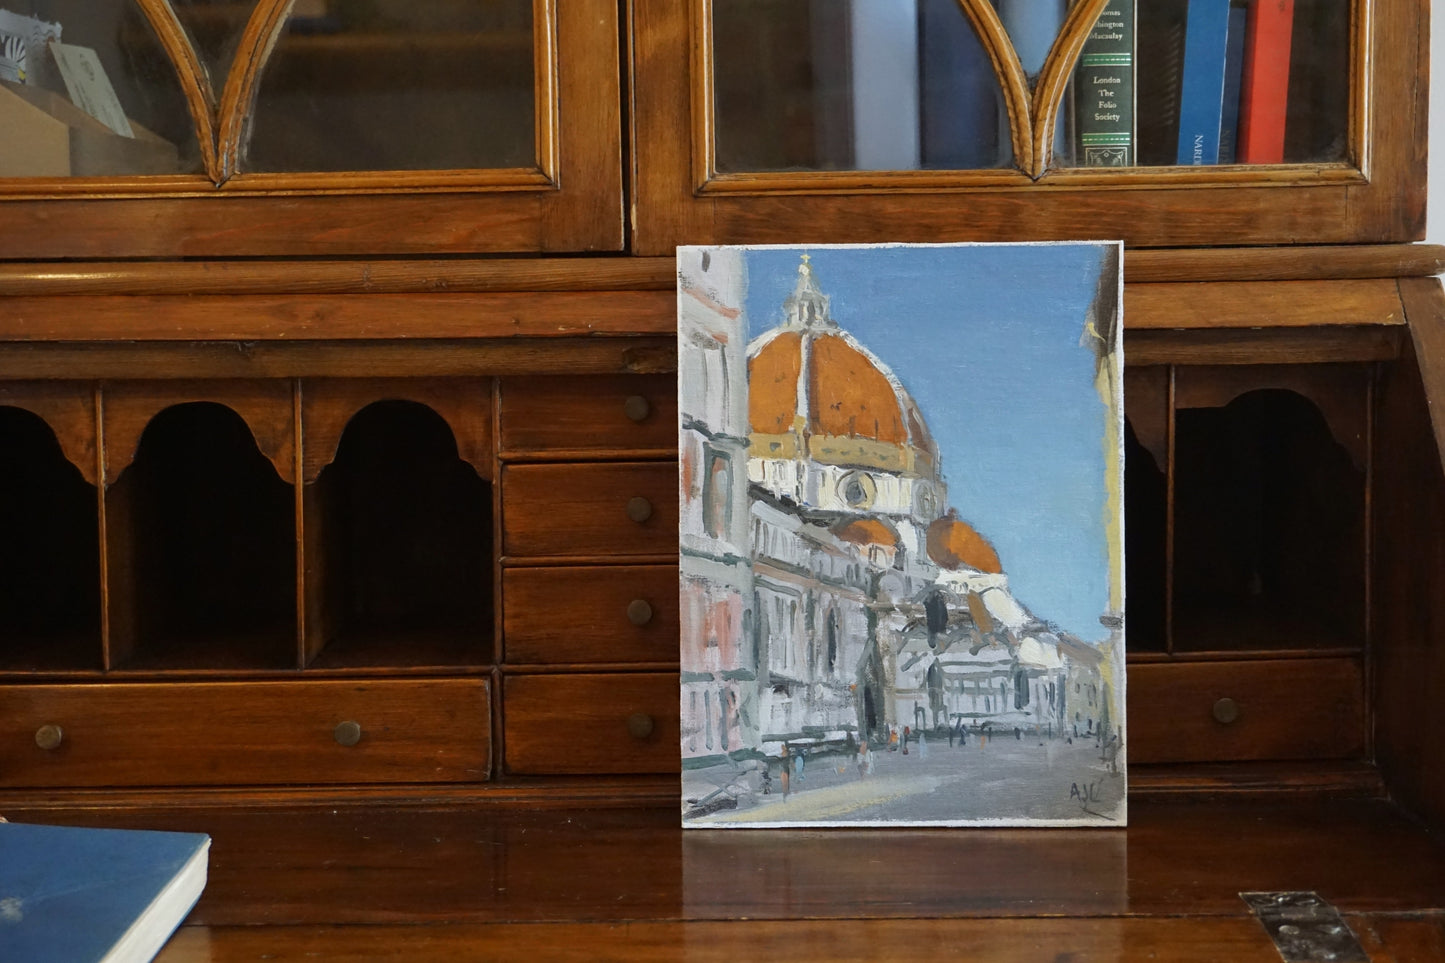 Oil painting showing the Duomo in Florence from another angle